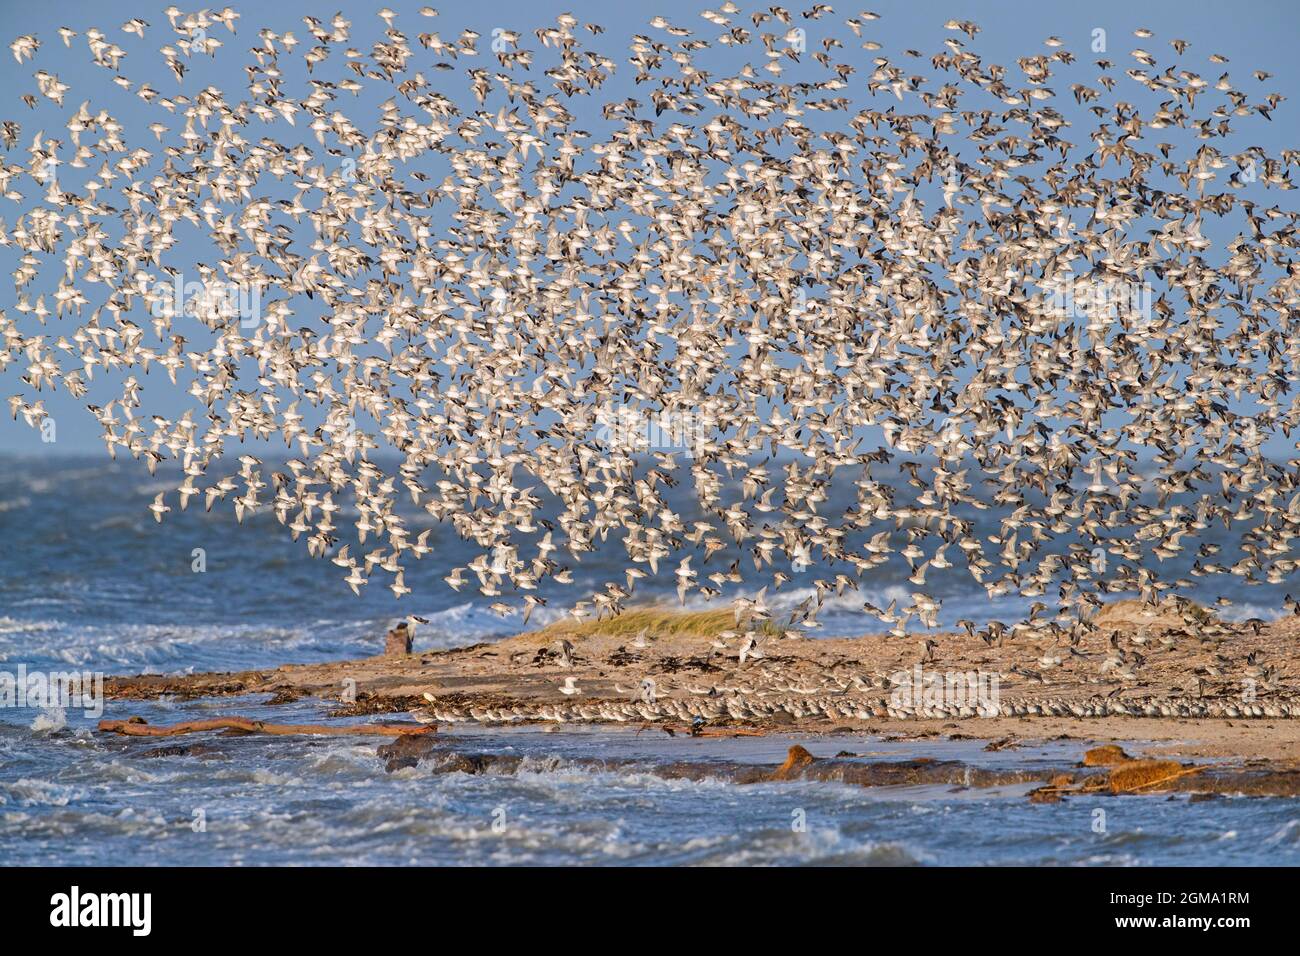 Red knot (Calidris canutus) flock of knots in non-breeding plumage flying over beach along the Schleswig-Holstein Wadden Sea National Park, Germany Stock Photo